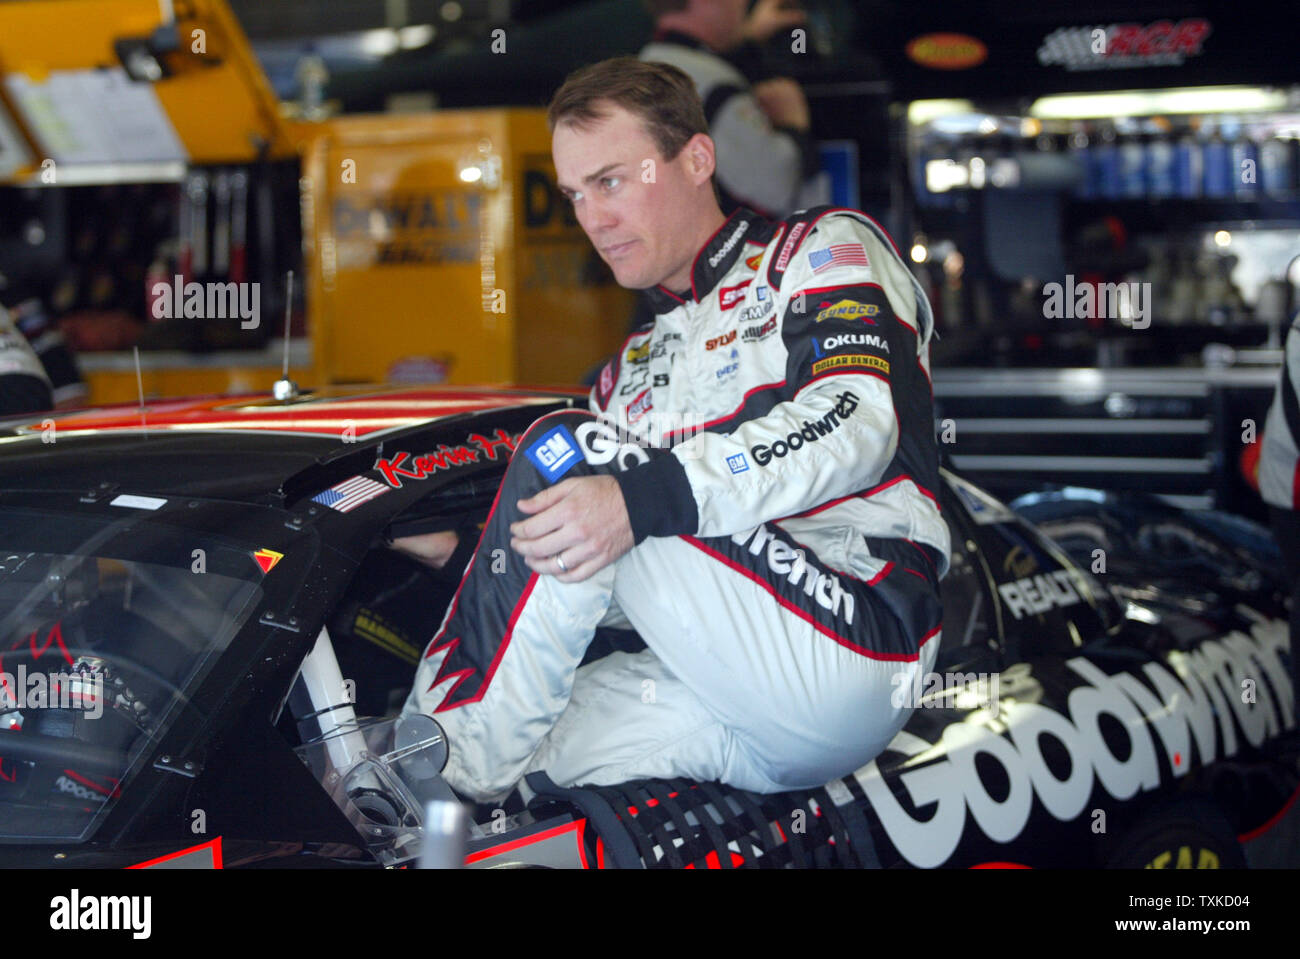 NASCAR driver Kevin Harvick climbs into his GM Goodwrench Chevrolet before the start of practice for the Bank of America 500 NASCAR Nextel Cup race at the Lowe's Motor Speedway near Charlotte, N.C., on October 12, 2006. (UPI Photo/Nell Redmond) Stock Photo